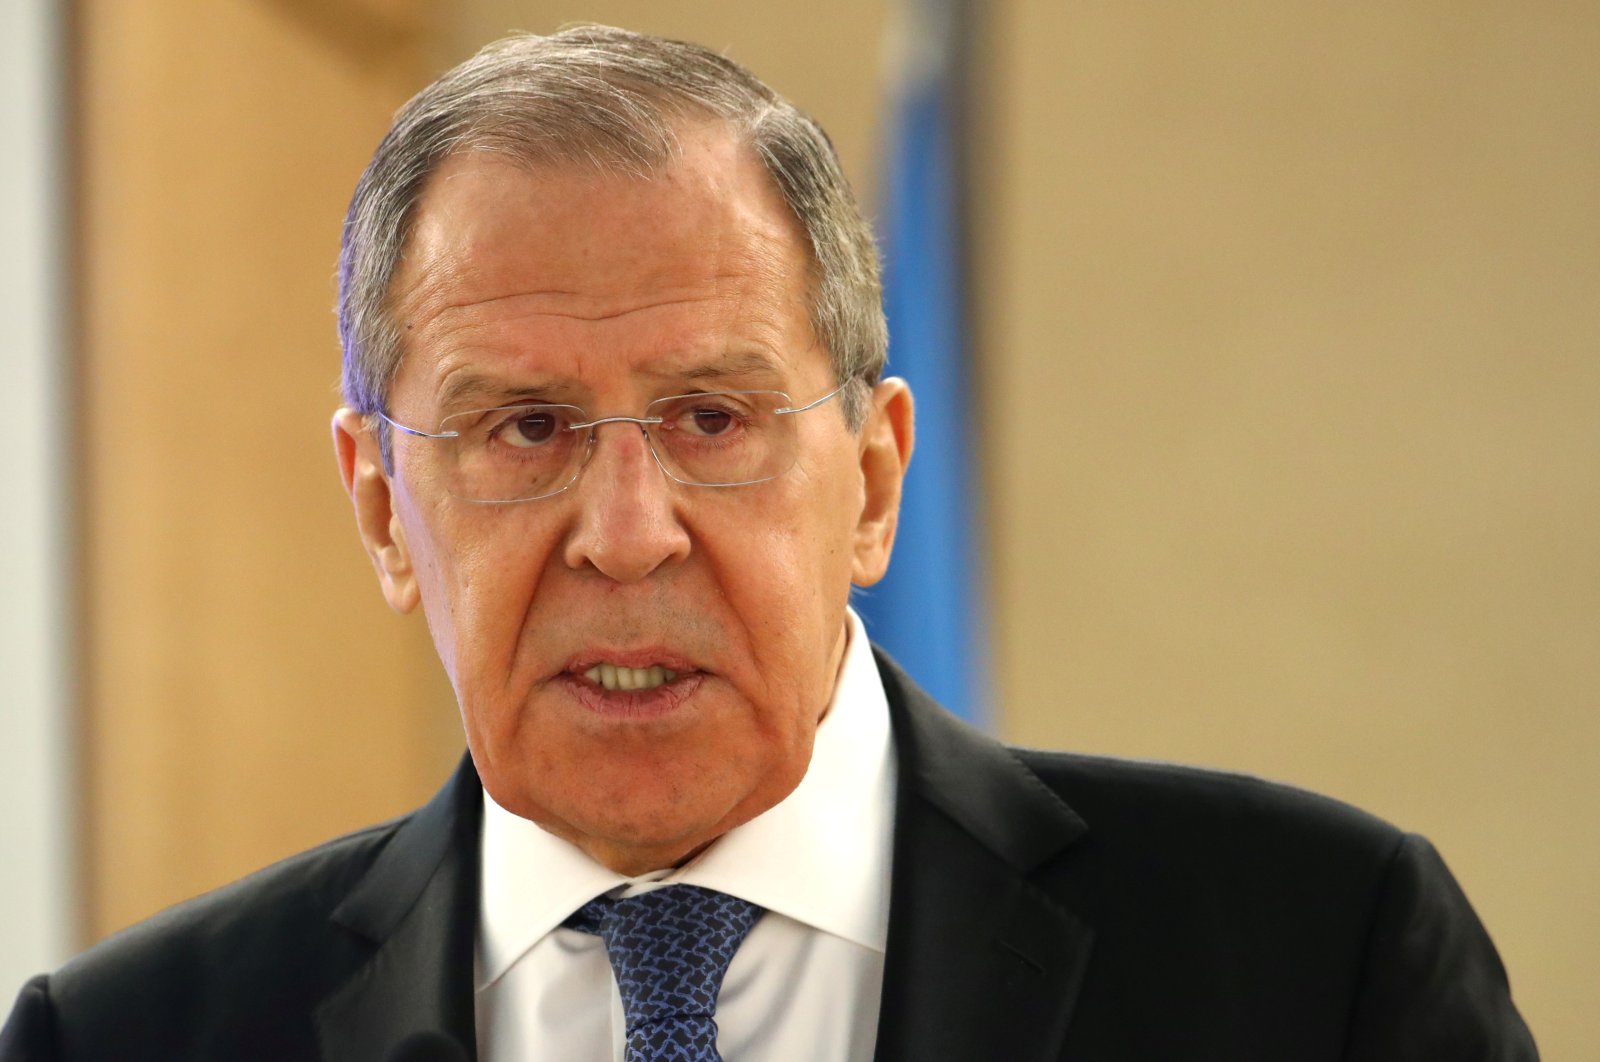 Russian Foreign Minister Sergey Lavrov attends the Human Rights Council at the United Nations in Geneva, Switzerland, Feb. 25, 2020. (REUTERS Photo)